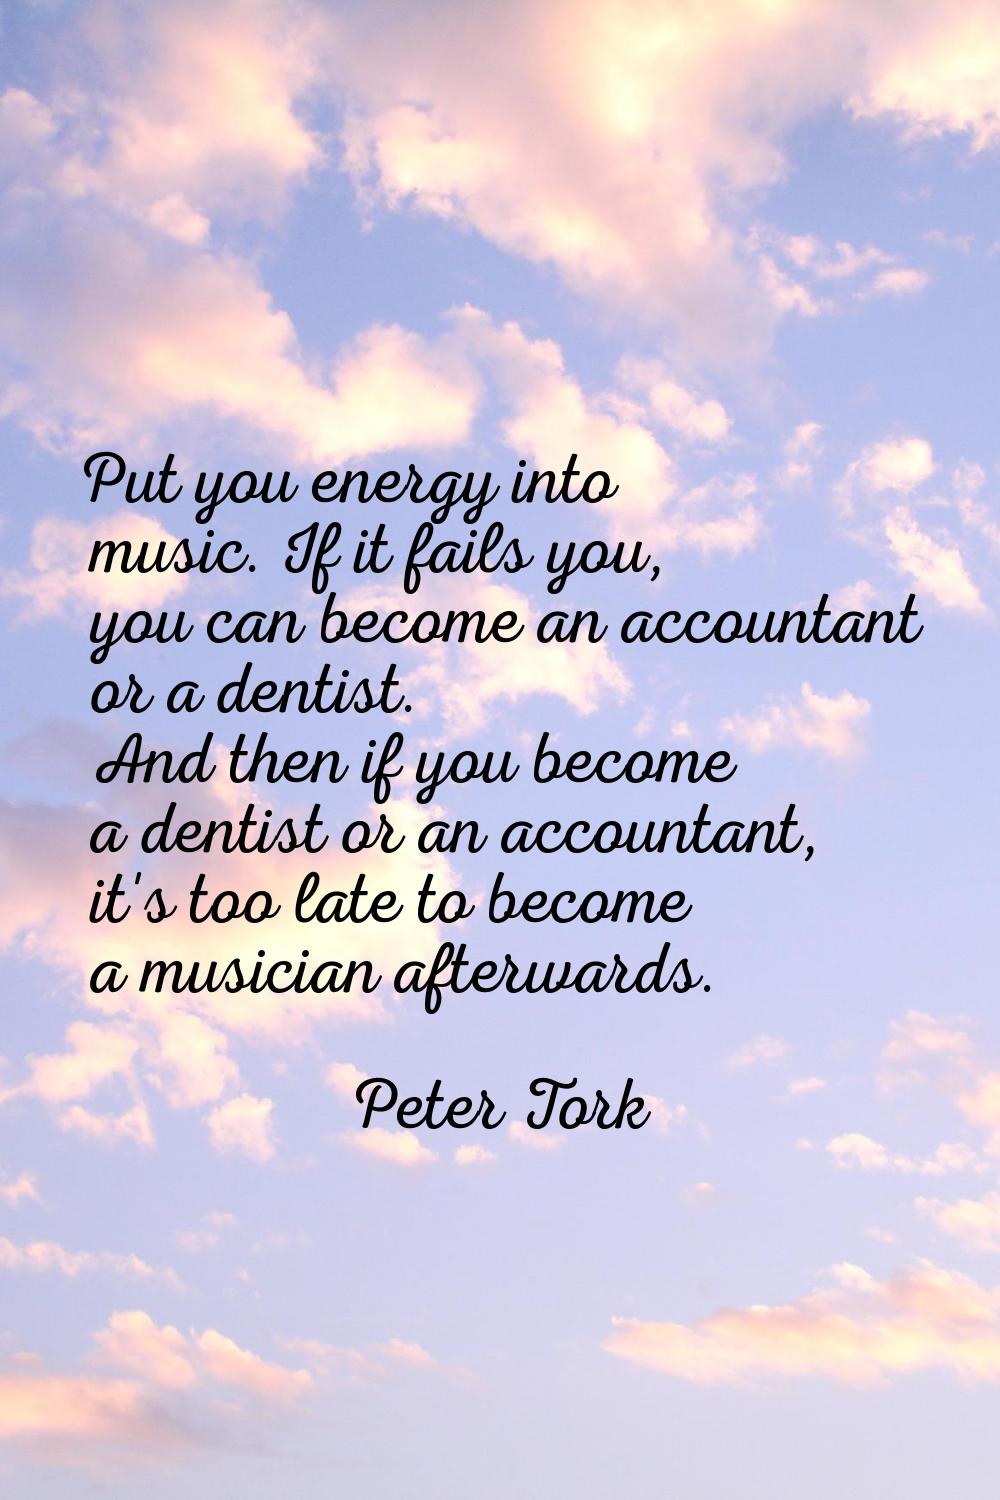 Put you energy into music. If it fails you, you can become an accountant or a dentist. And then if 